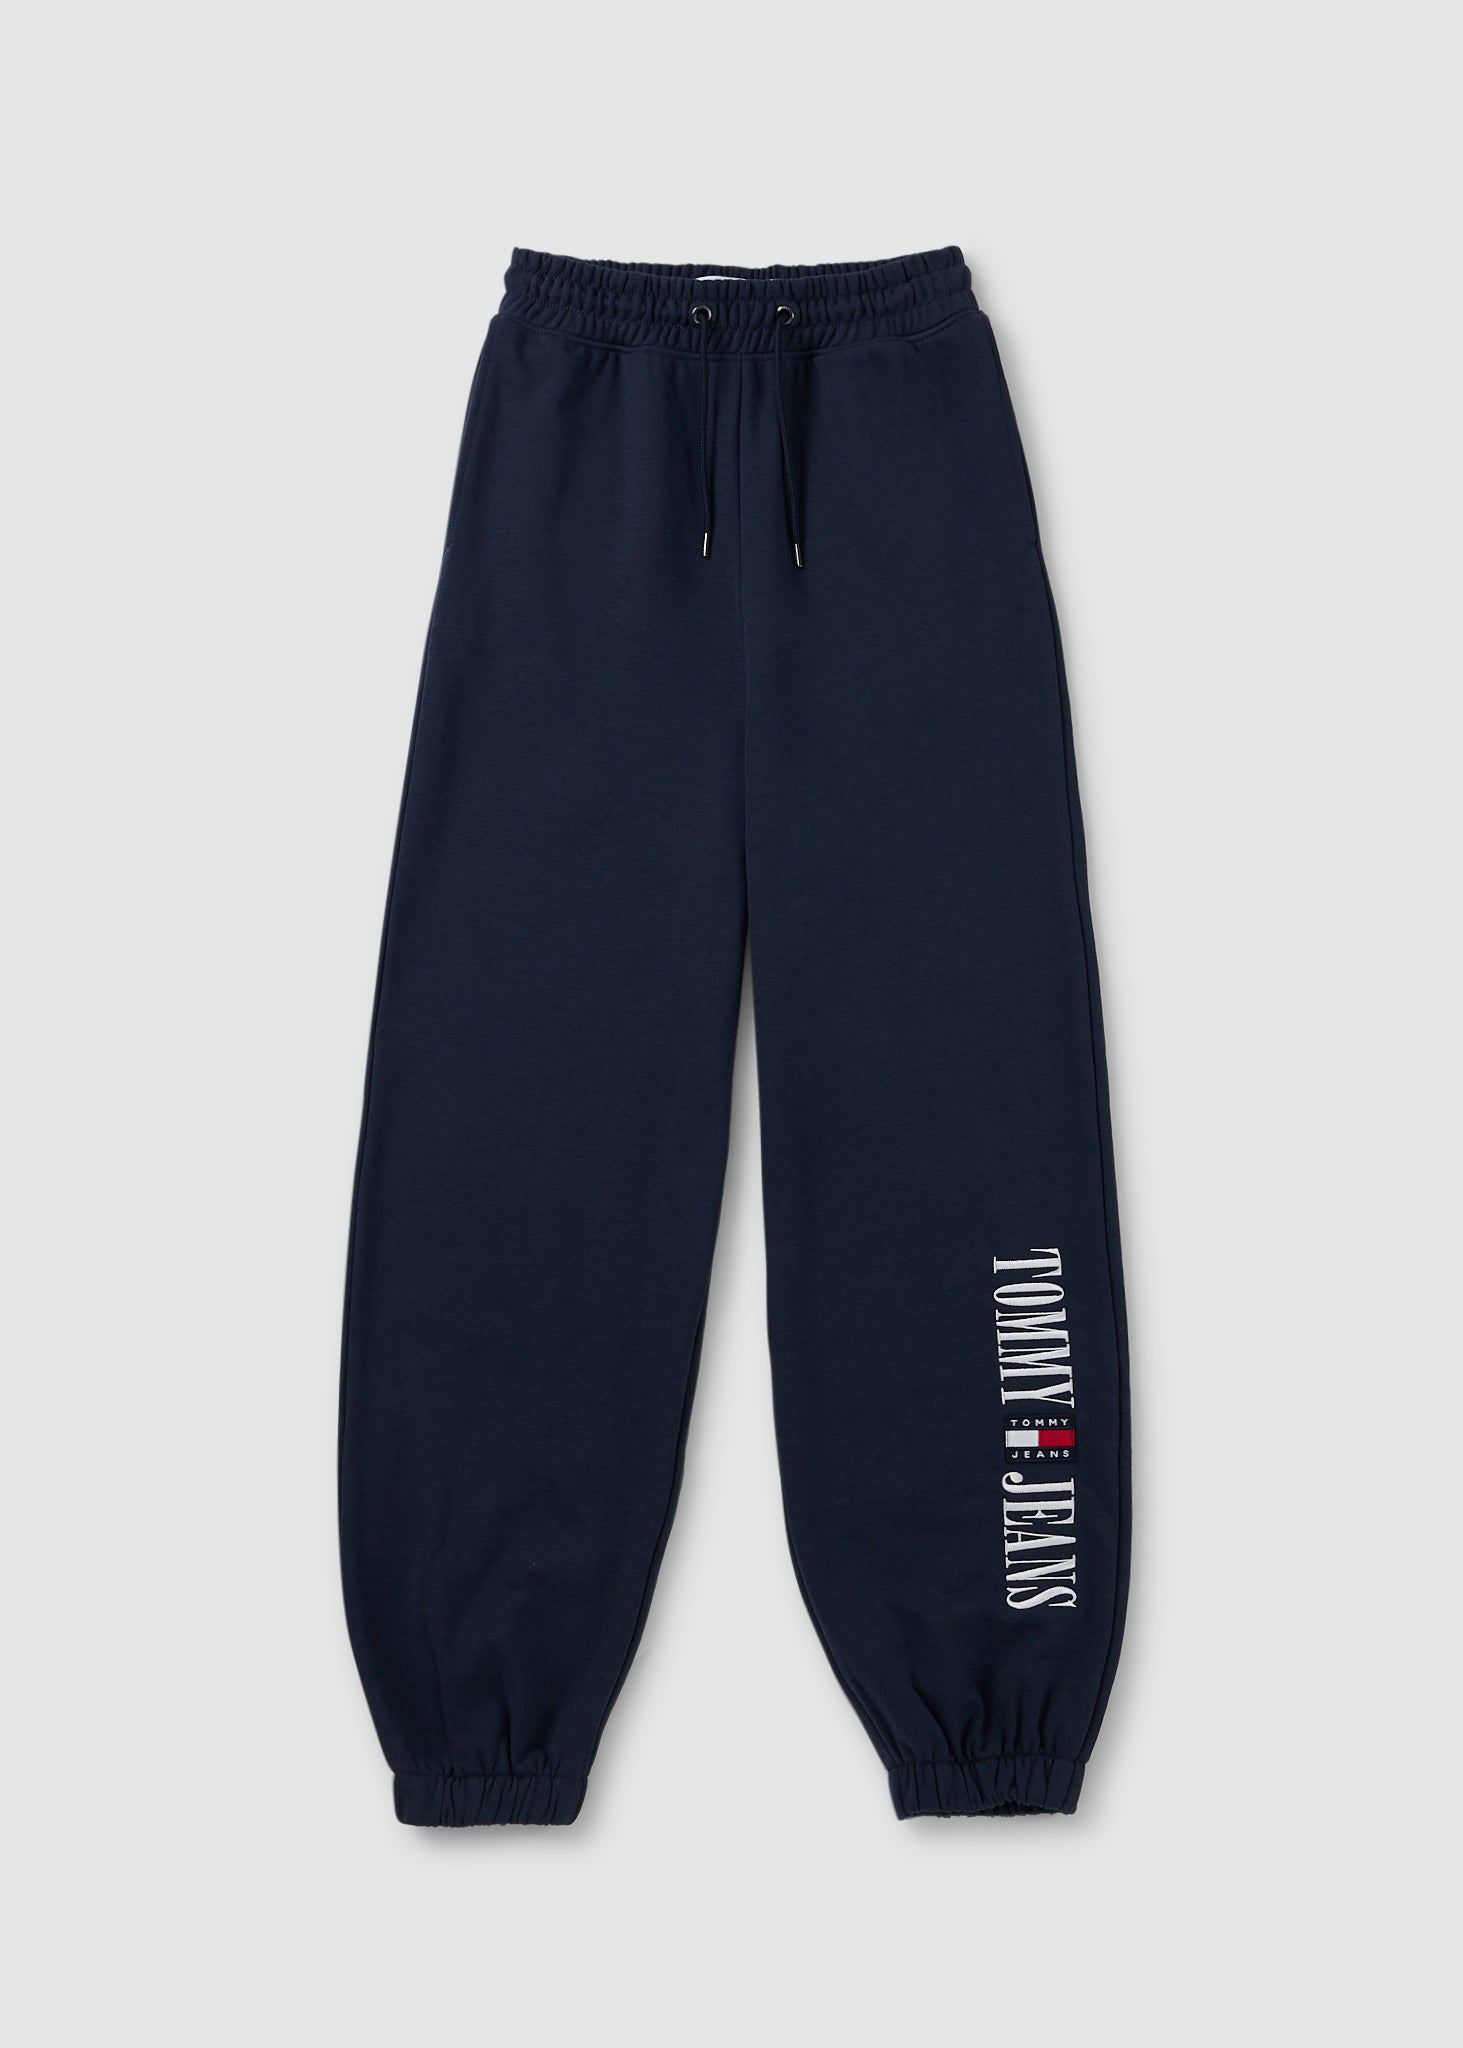 Image of Tommy Hilfiger Womens Relaxed Archive Sweatpants In Twilight Navy